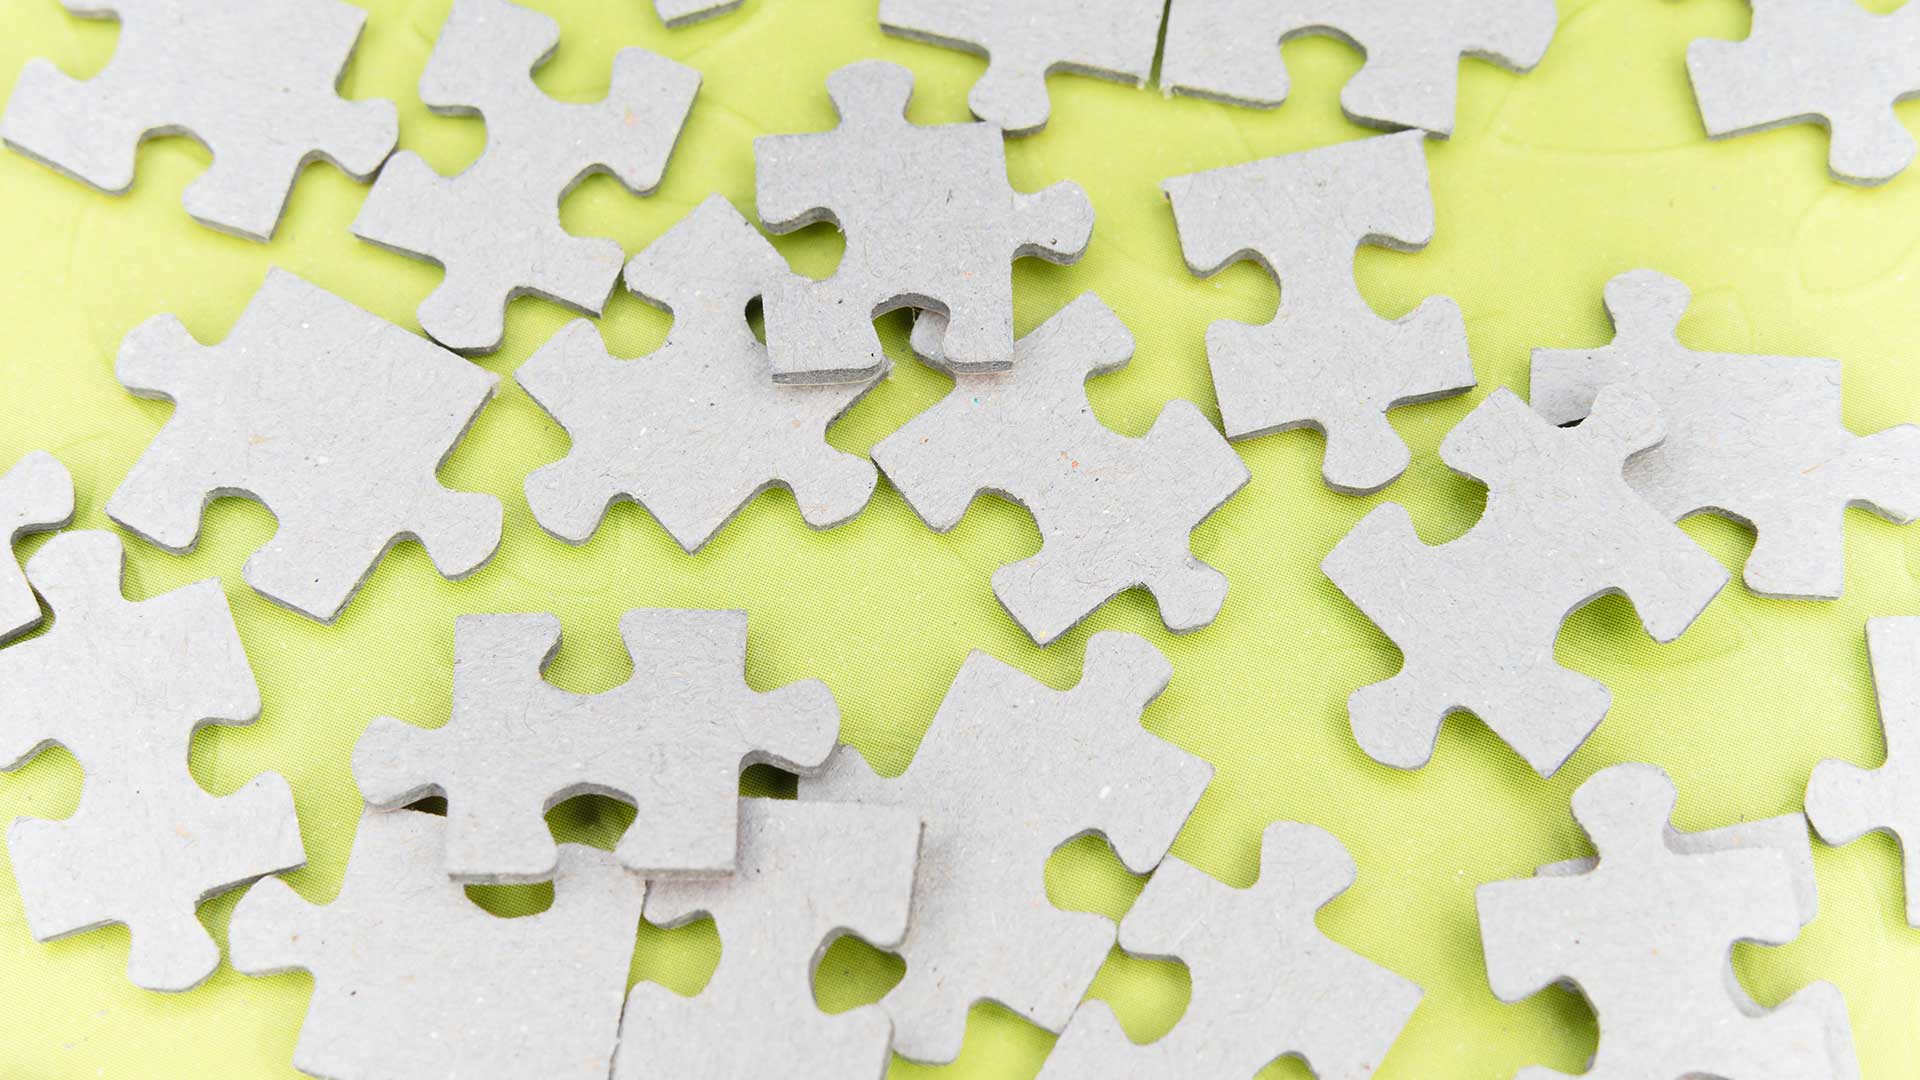 Puzzle pieces representing the supply chain